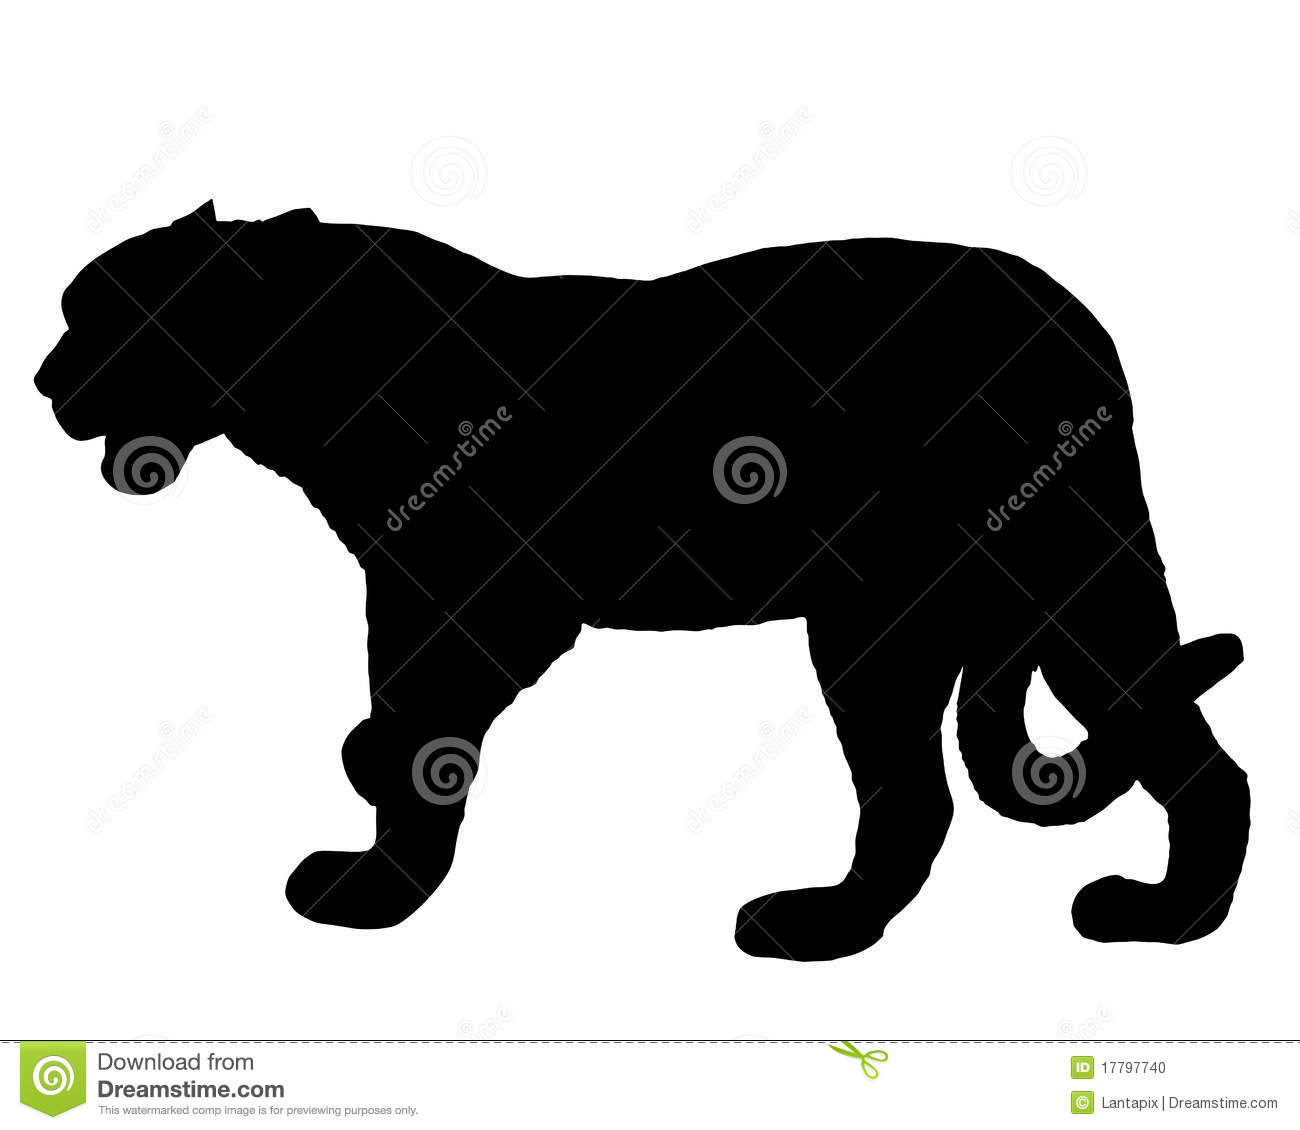 Detailed And Colorful Illustration Of Jaguar Silhouette